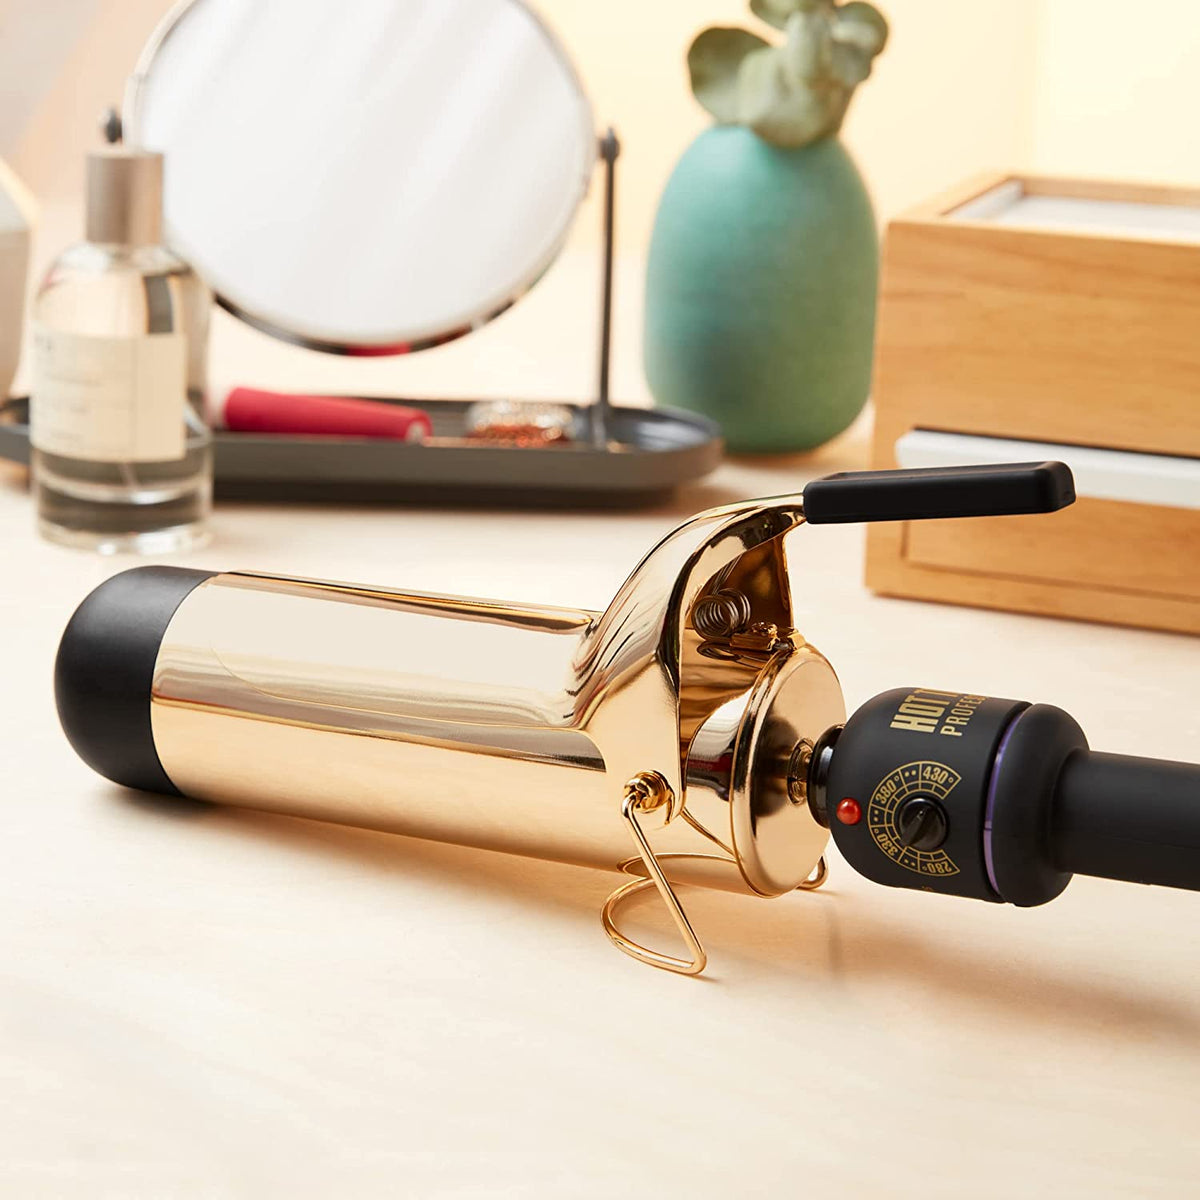 Hot Tools Spring Curling Iron